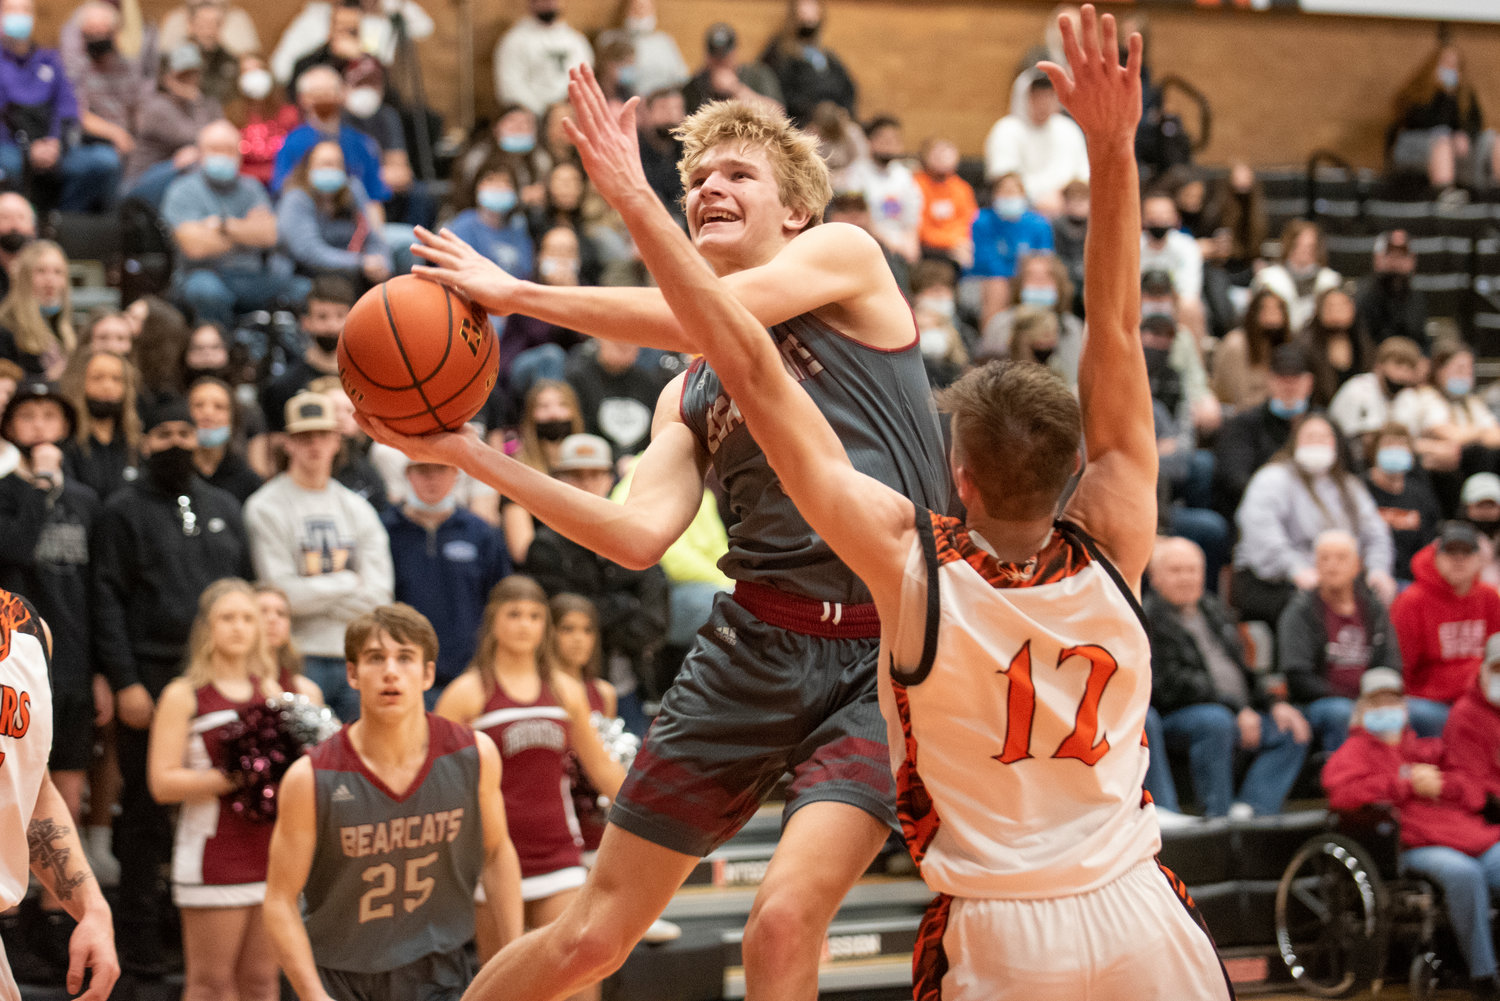 W.F. West senior Dirk Plakinger drives to the bucket during the second round of the Swamp Cup on Wednesday in Centralia.